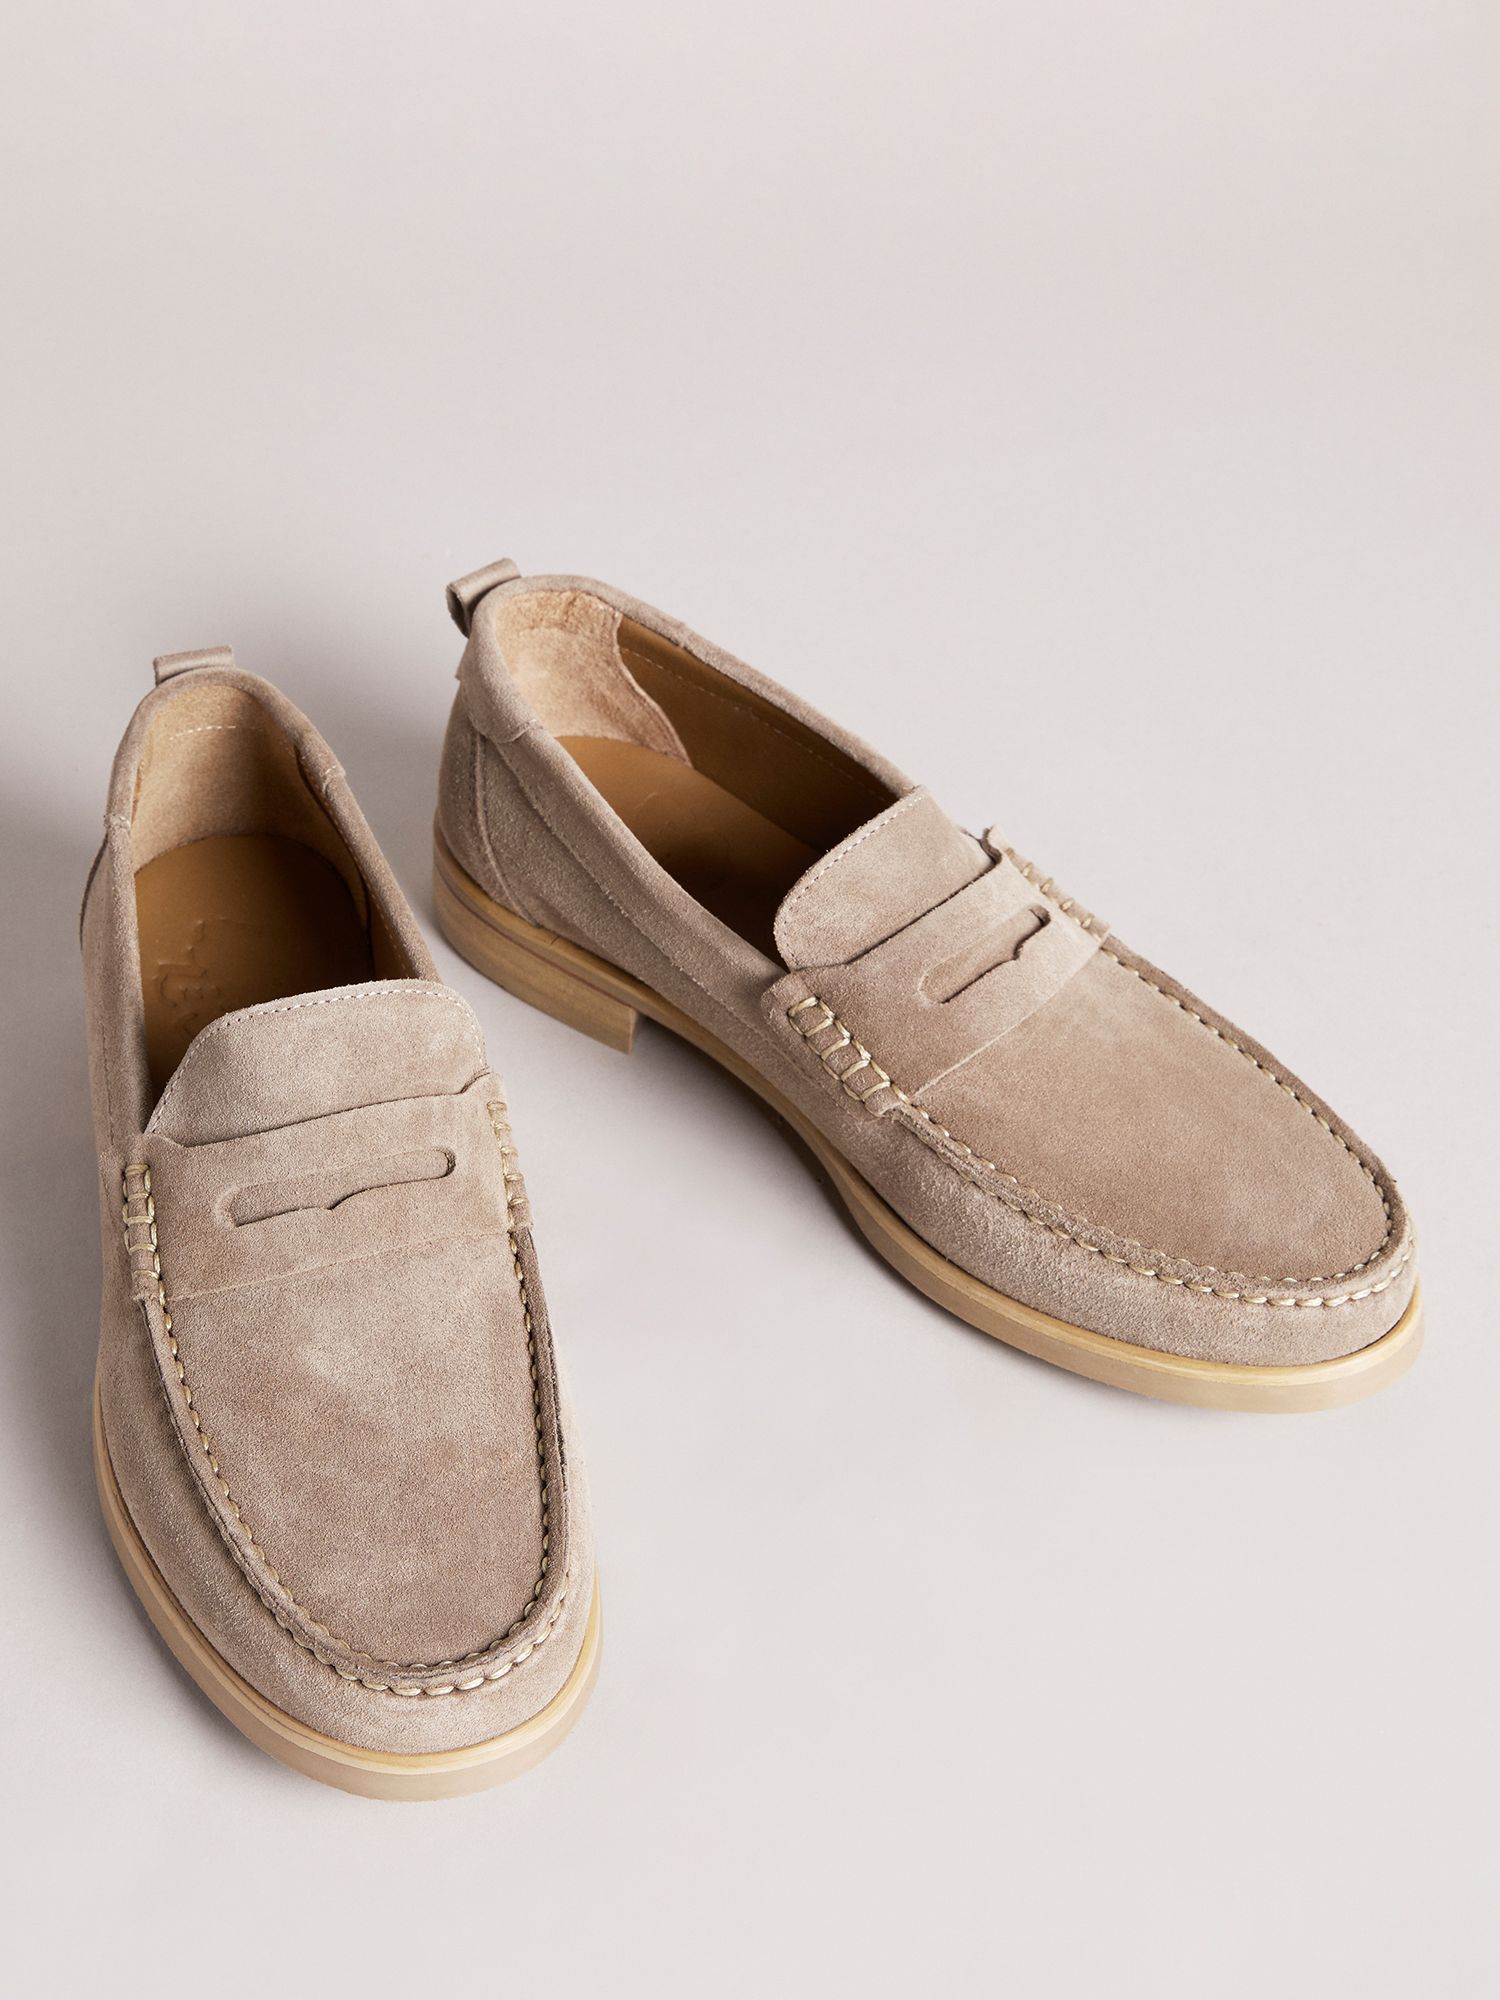 Shop loafers